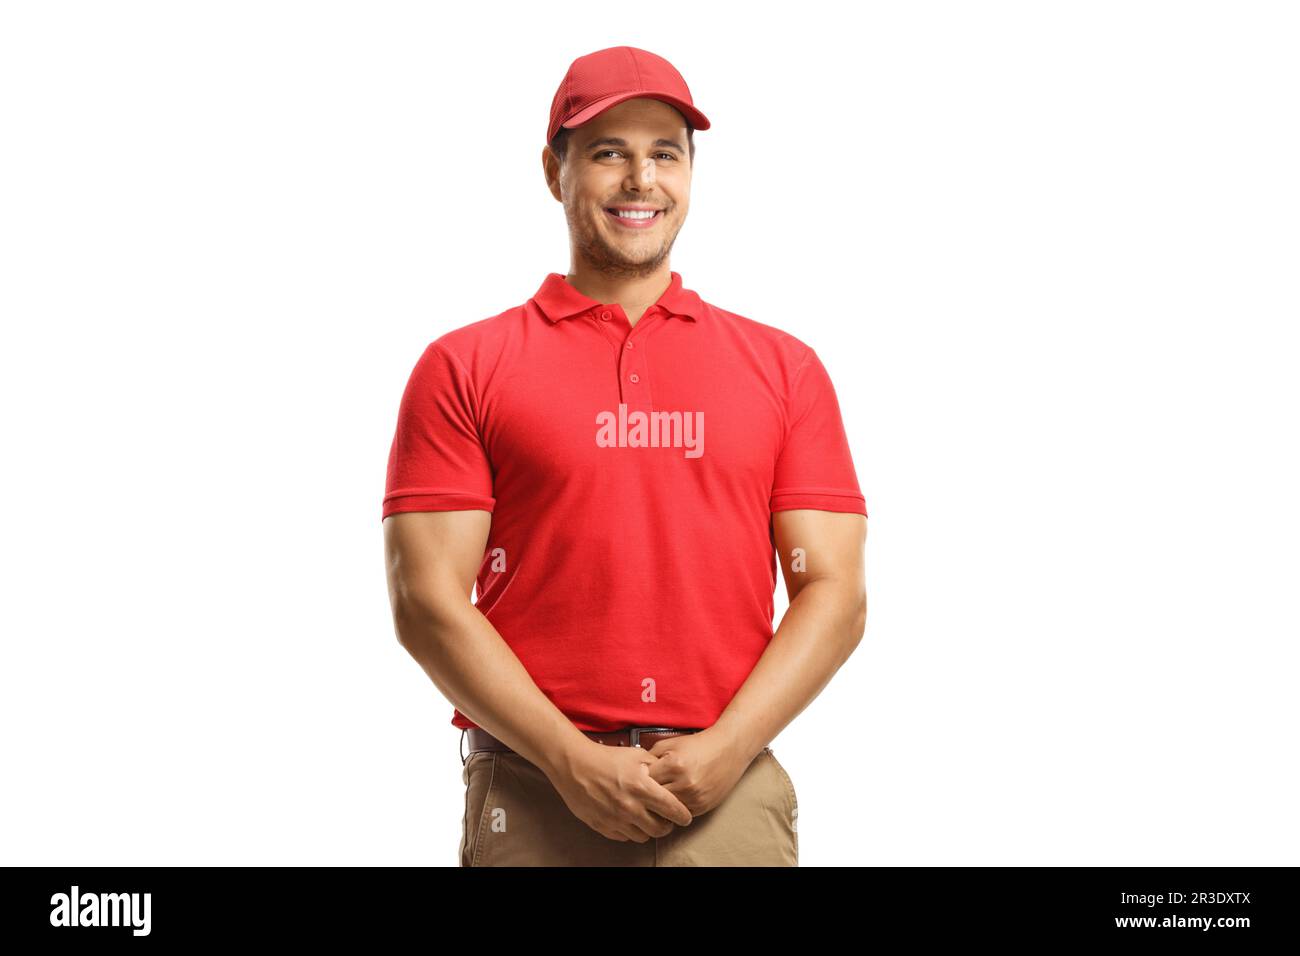 Smiling man in a red t-shirt and a red cap isolated on white background Stock Photo